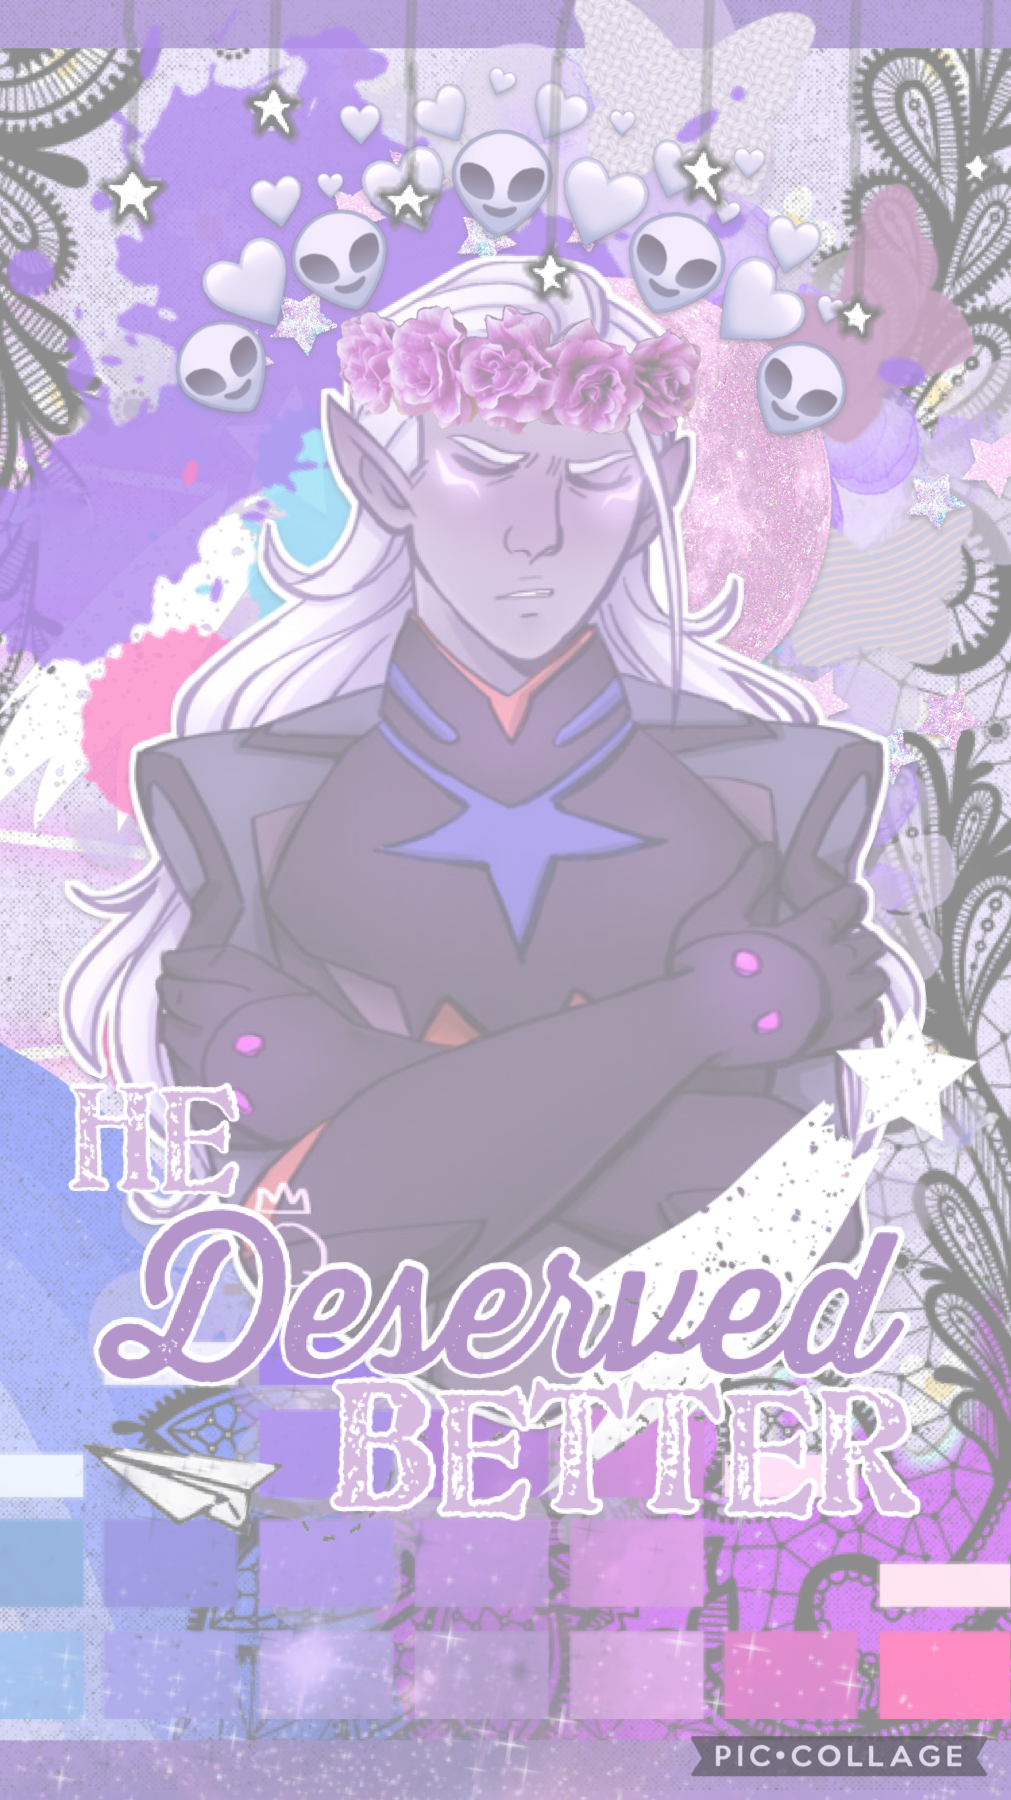 Lotor💜👾👽(I’m still mad about what they did to him in seasons 6-8)